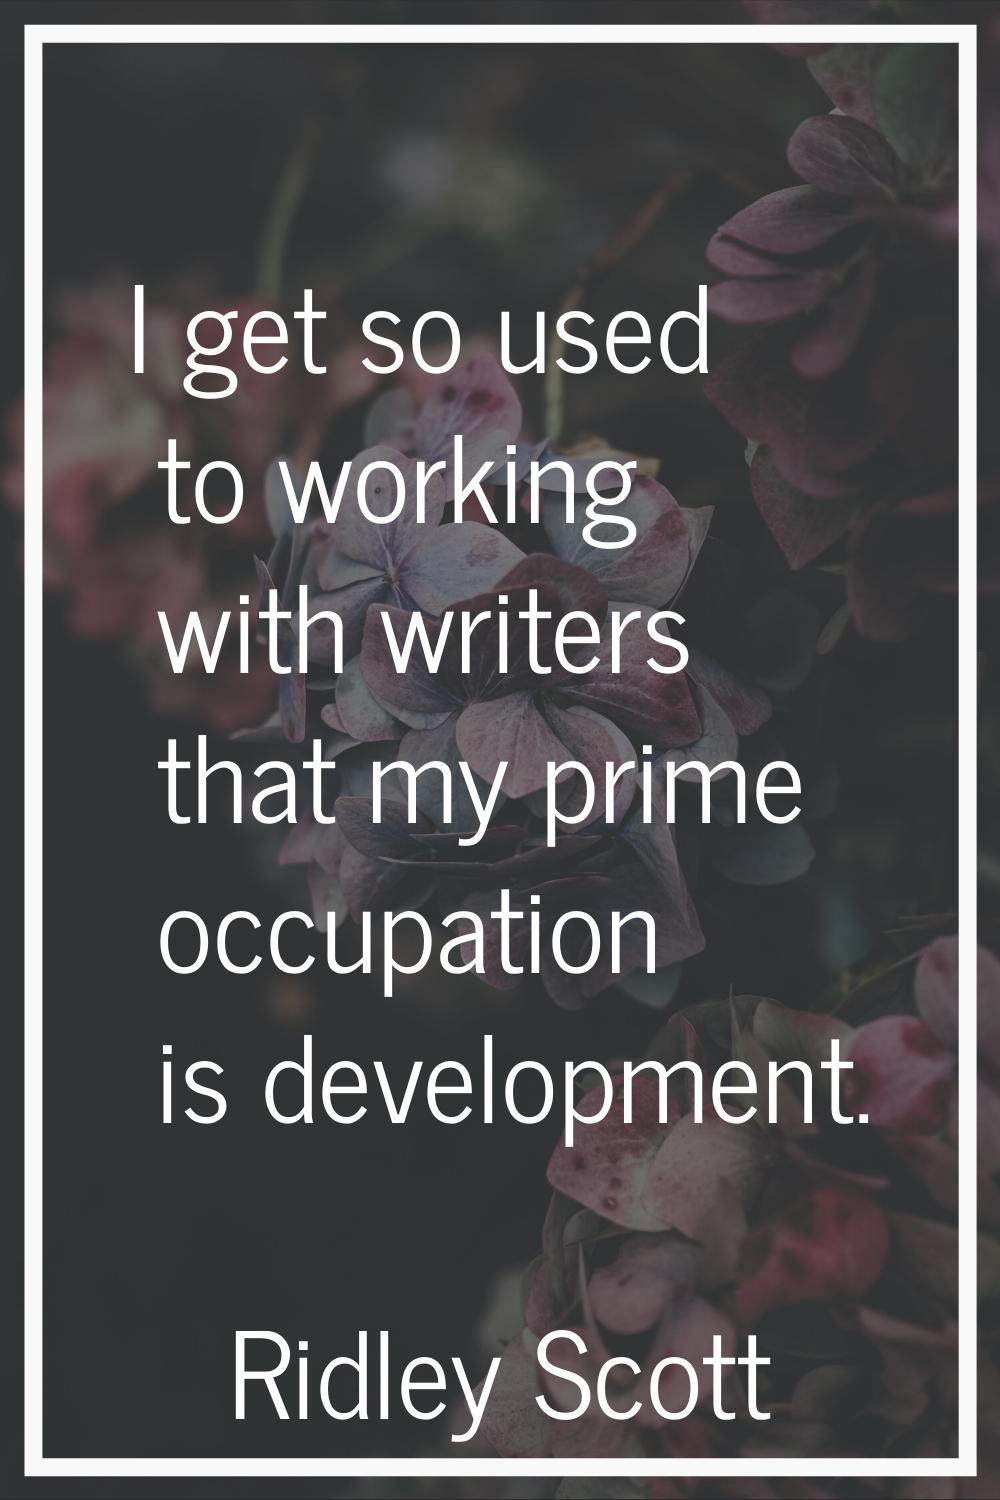 I get so used to working with writers that my prime occupation is development.